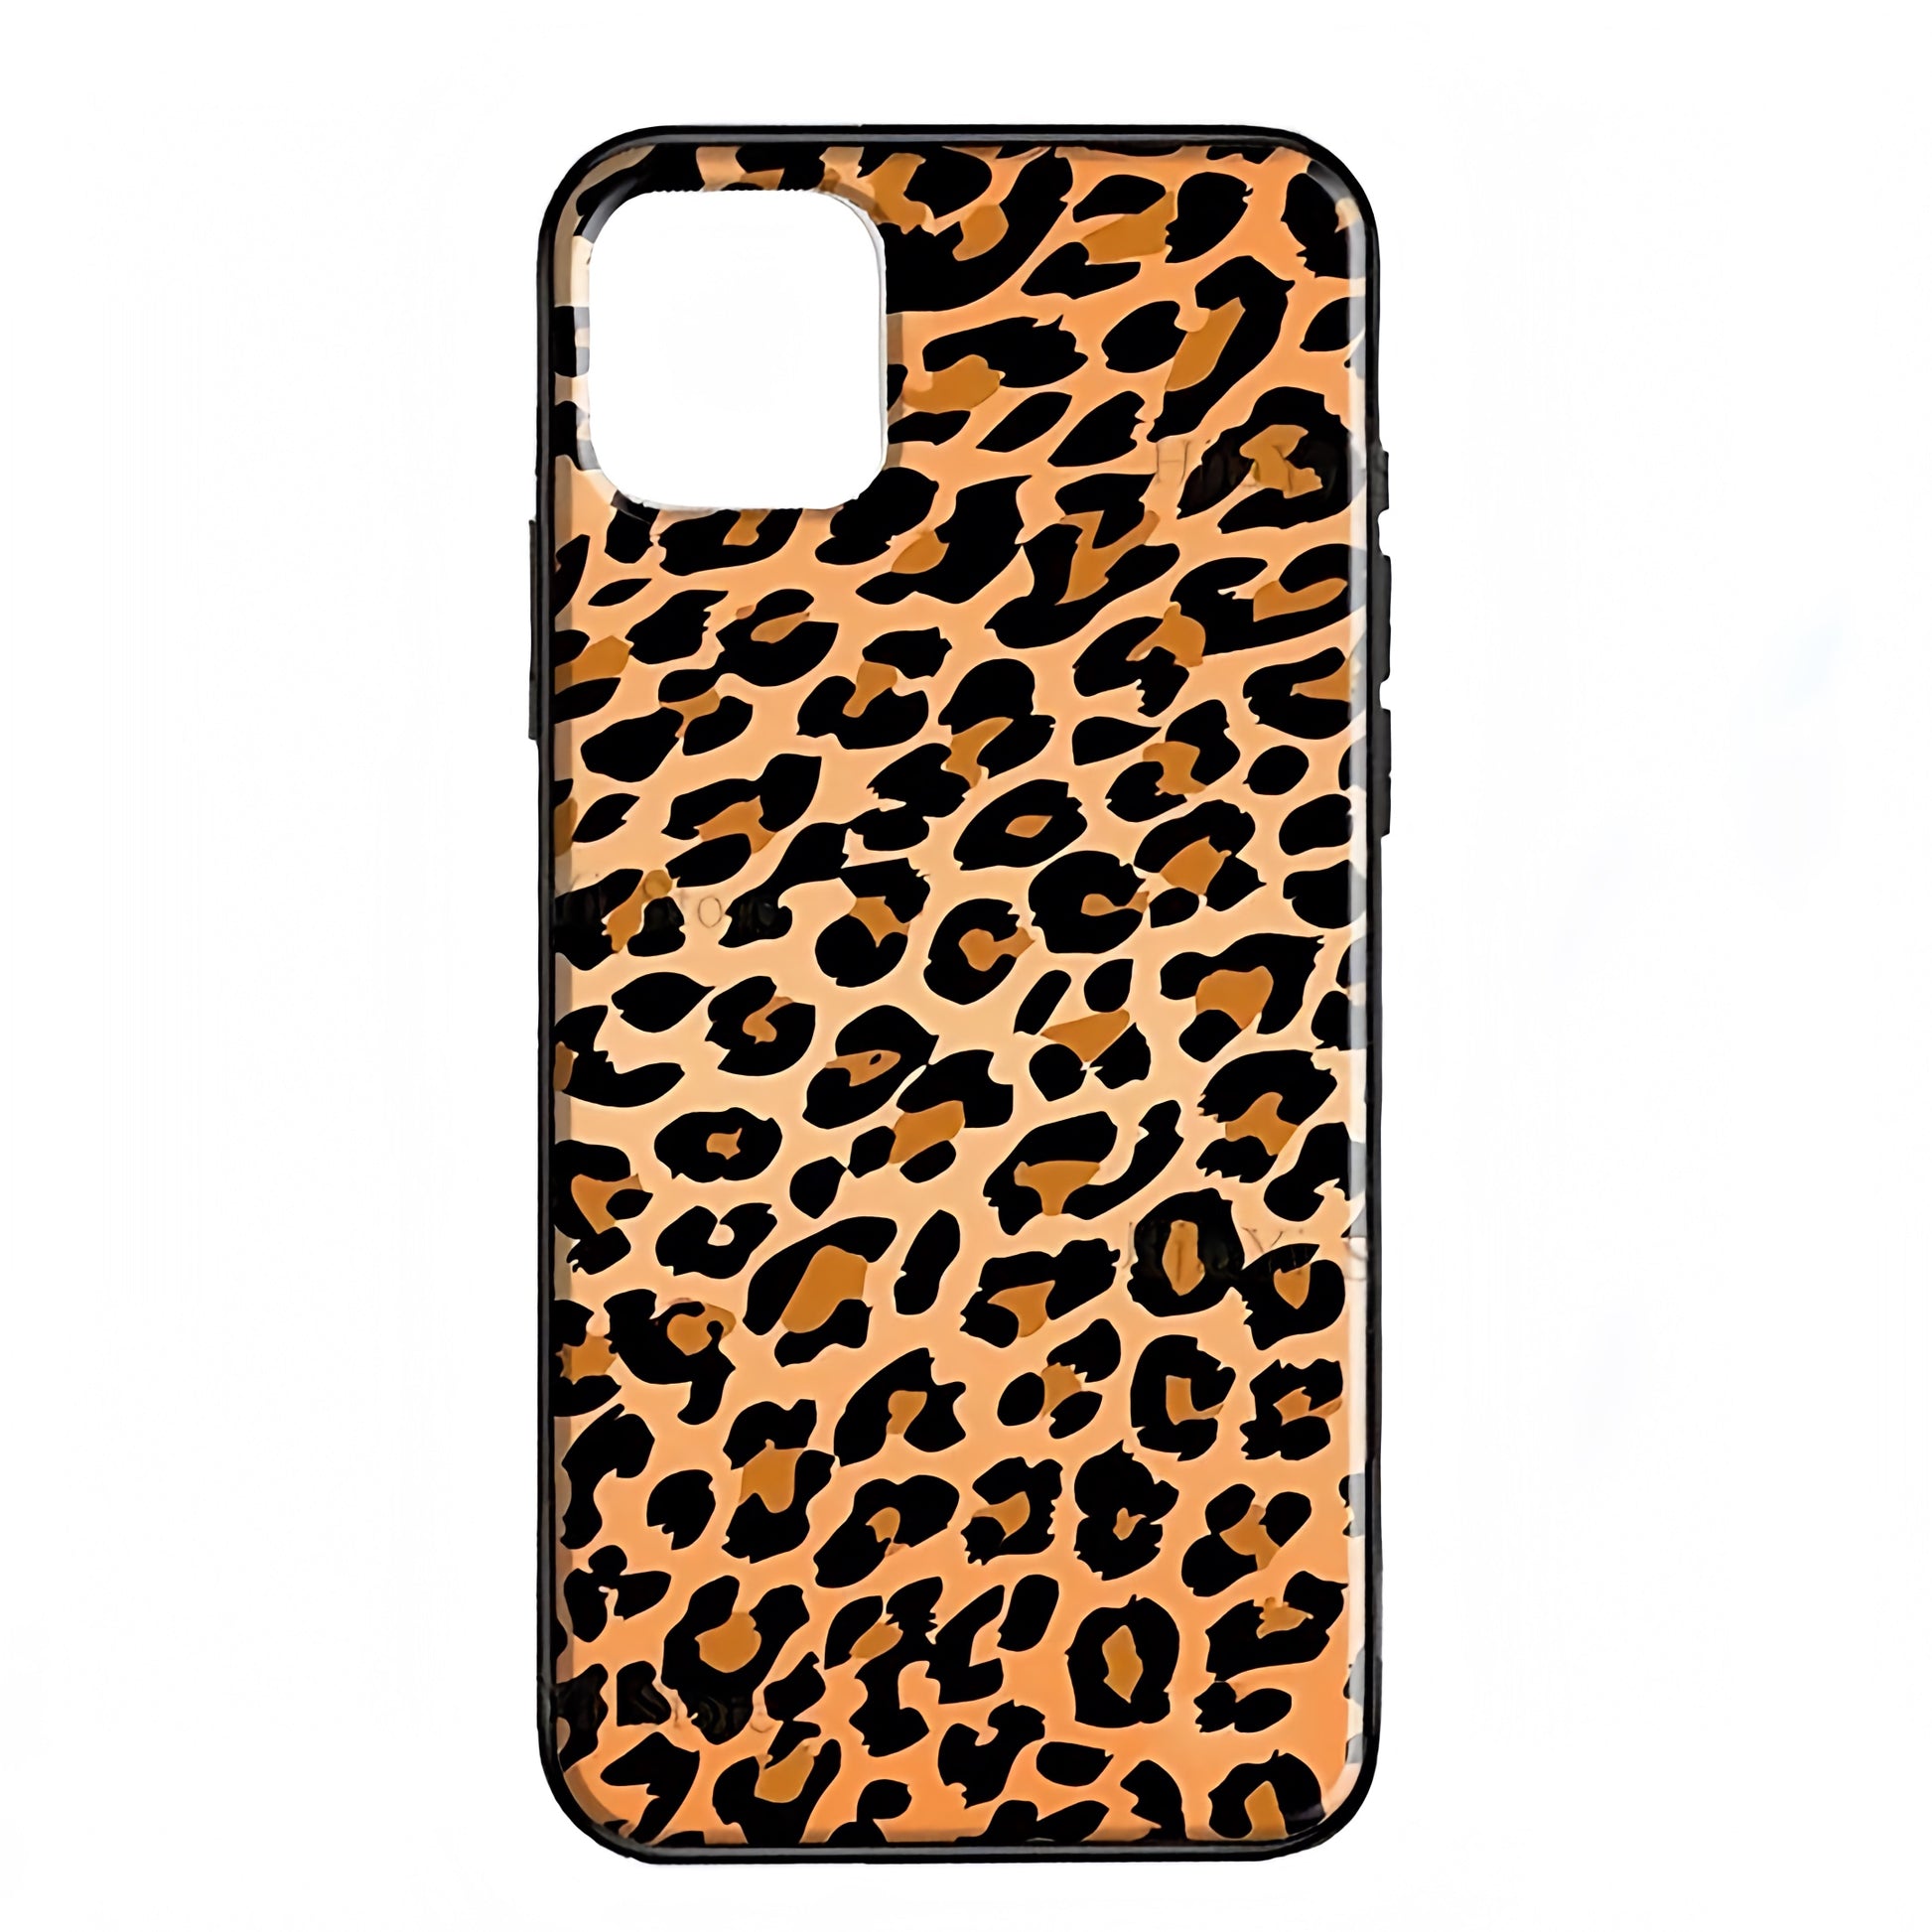 leopard-cheetah-animal-print-patterned-brown-black-hard-plastic-shock-proof-high-quality-phone-case-for-iphone-chic-trendy-y2k-exotic-spring-2024-summer-wildflower-casetify-dupe